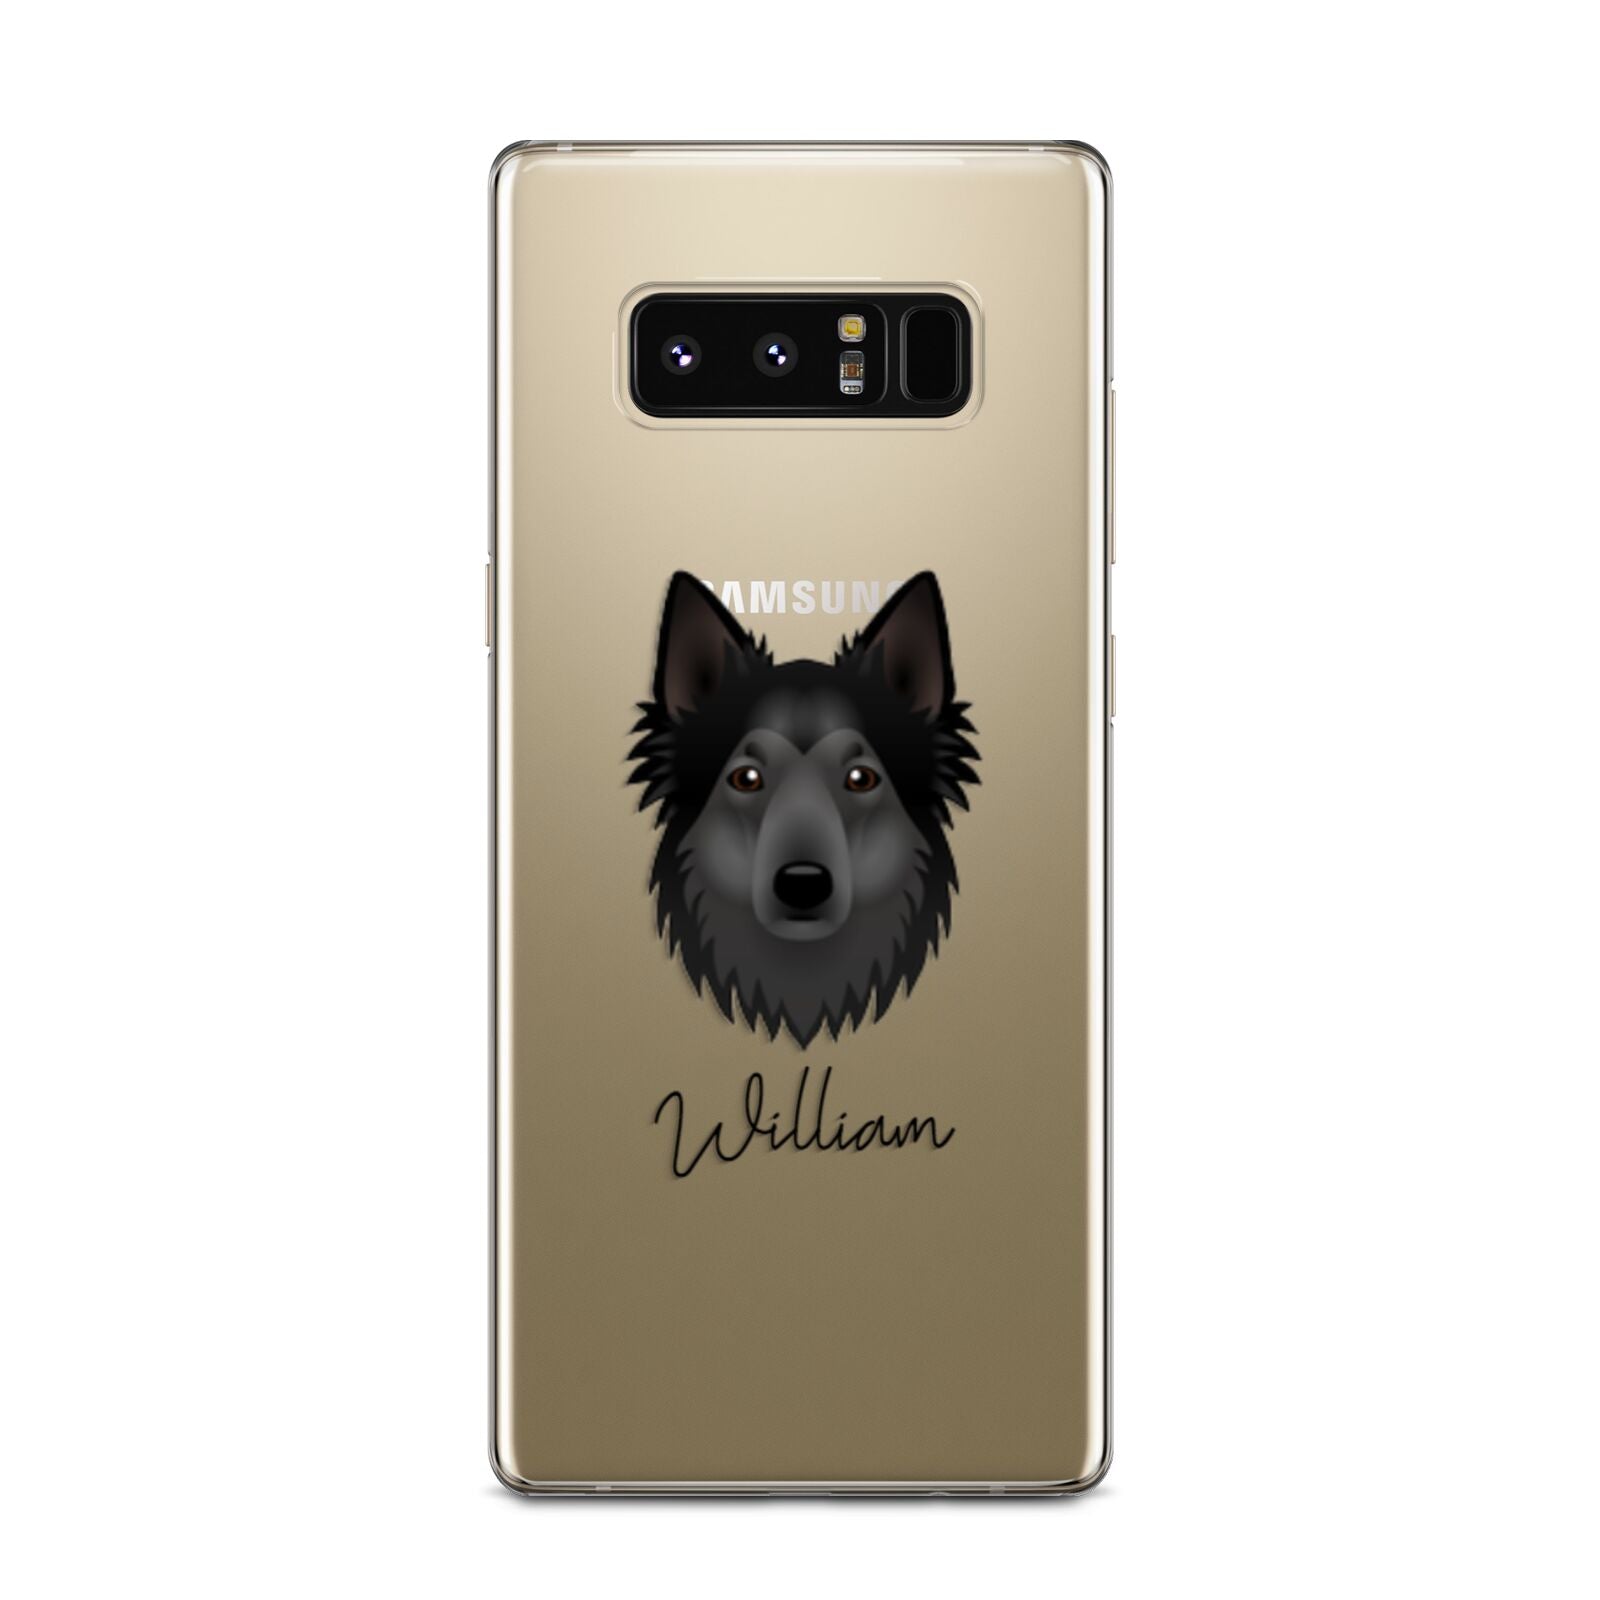 Shollie Personalised Samsung Galaxy Note 8 Case